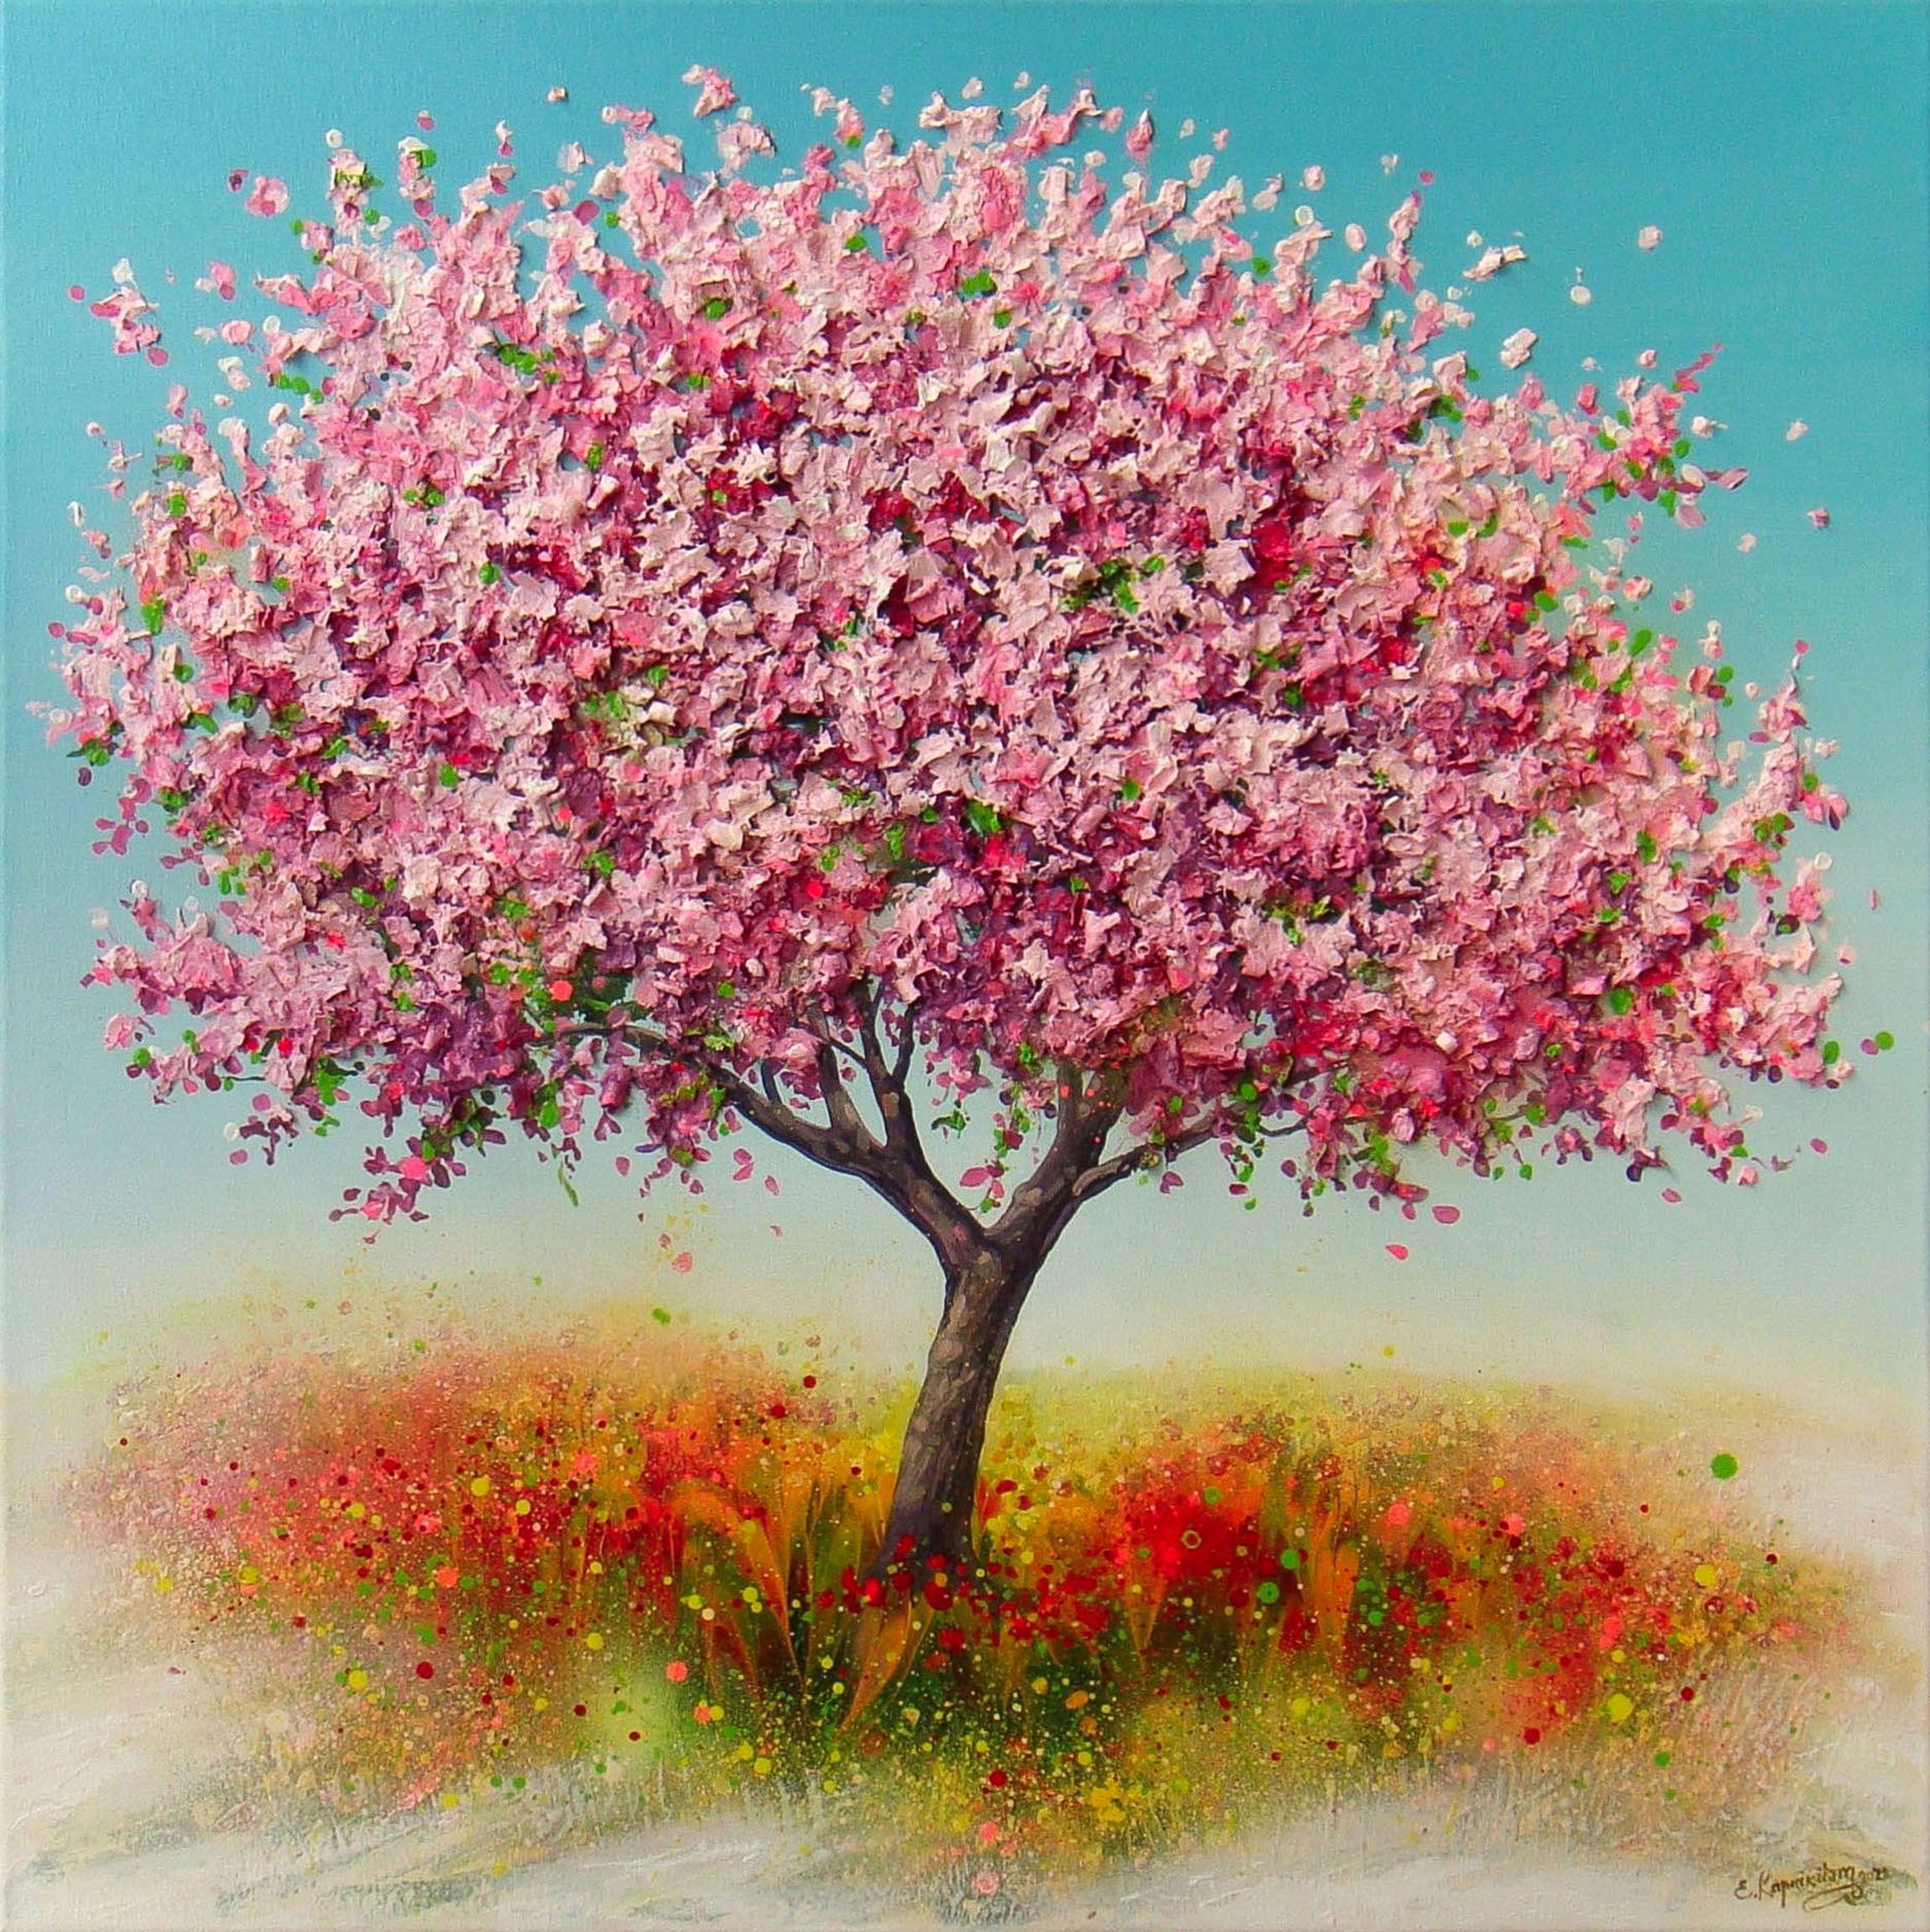 SPRING BLOMING TREE, Mixed Media on Canvas